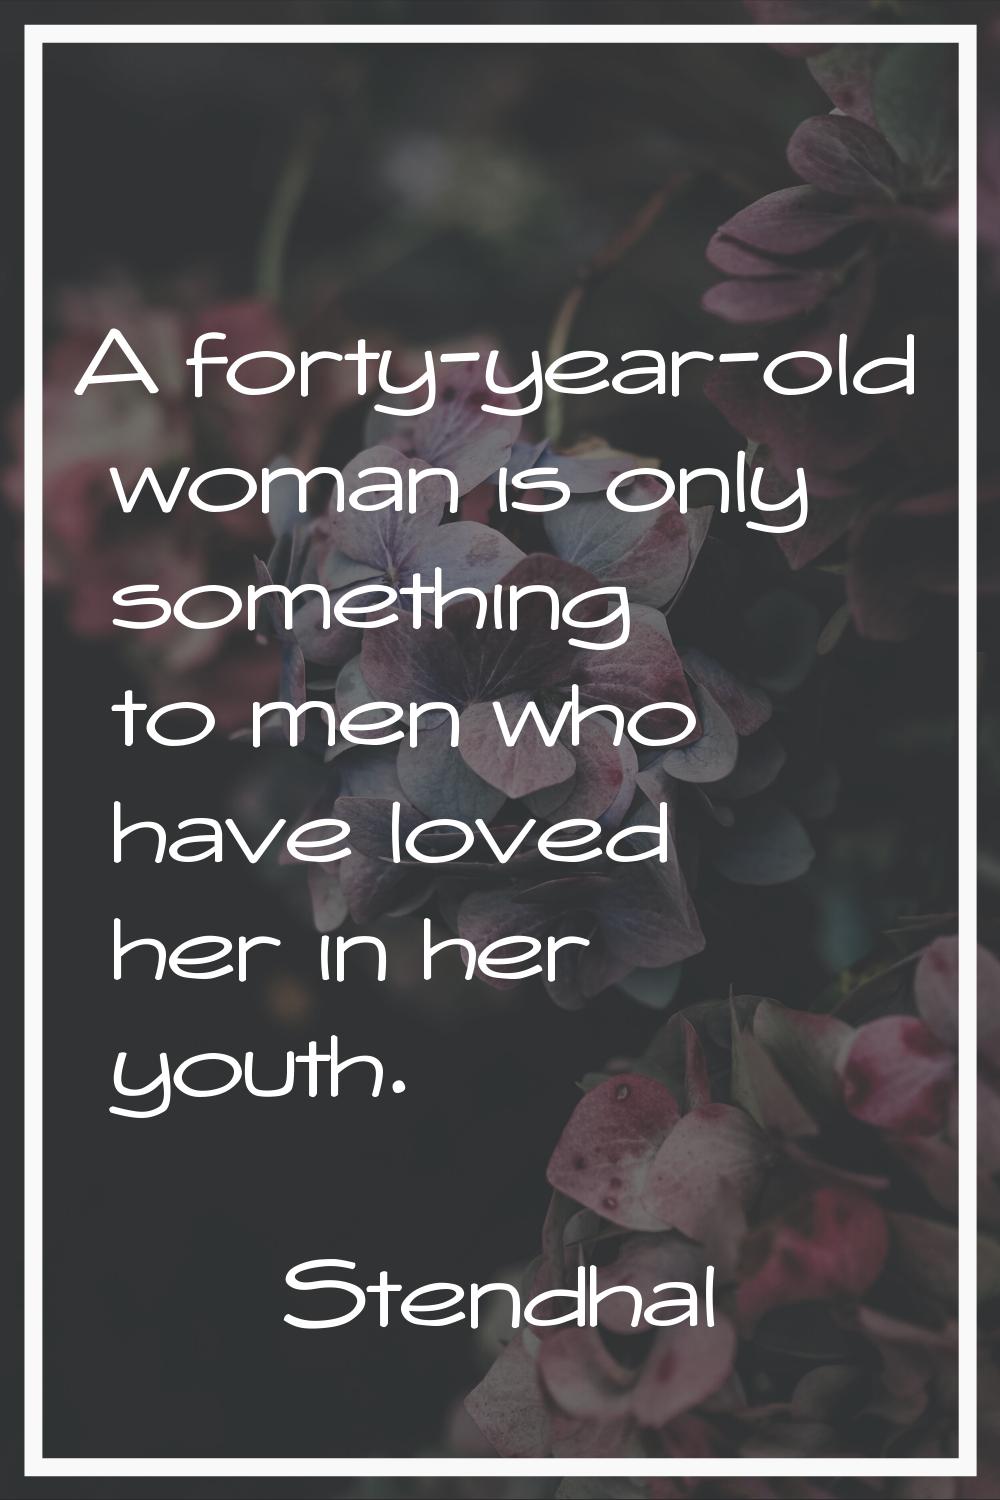 A forty-year-old woman is only something to men who have loved her in her youth.